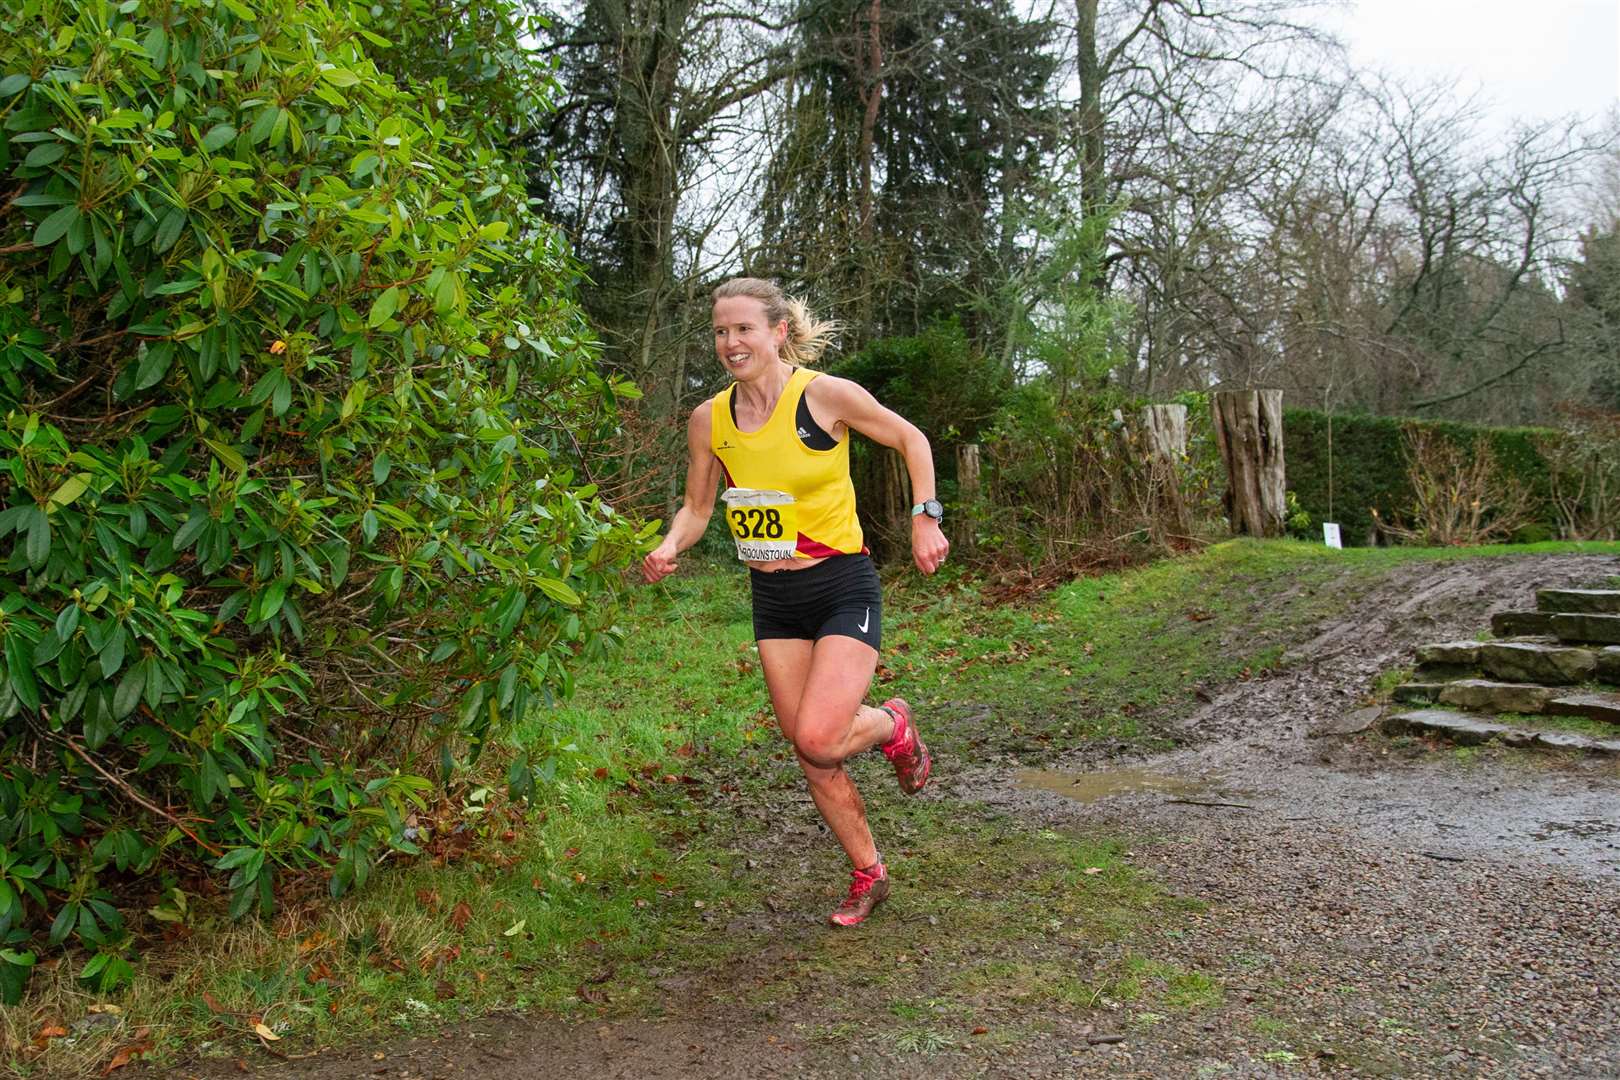 Inverness Harriers' Catriona Fraser finished first overall in the Senior Women's Cross Country race at Gordonstoun in a time of 31 minutes and 11 seconds. Picture: Daniel Forsyth..